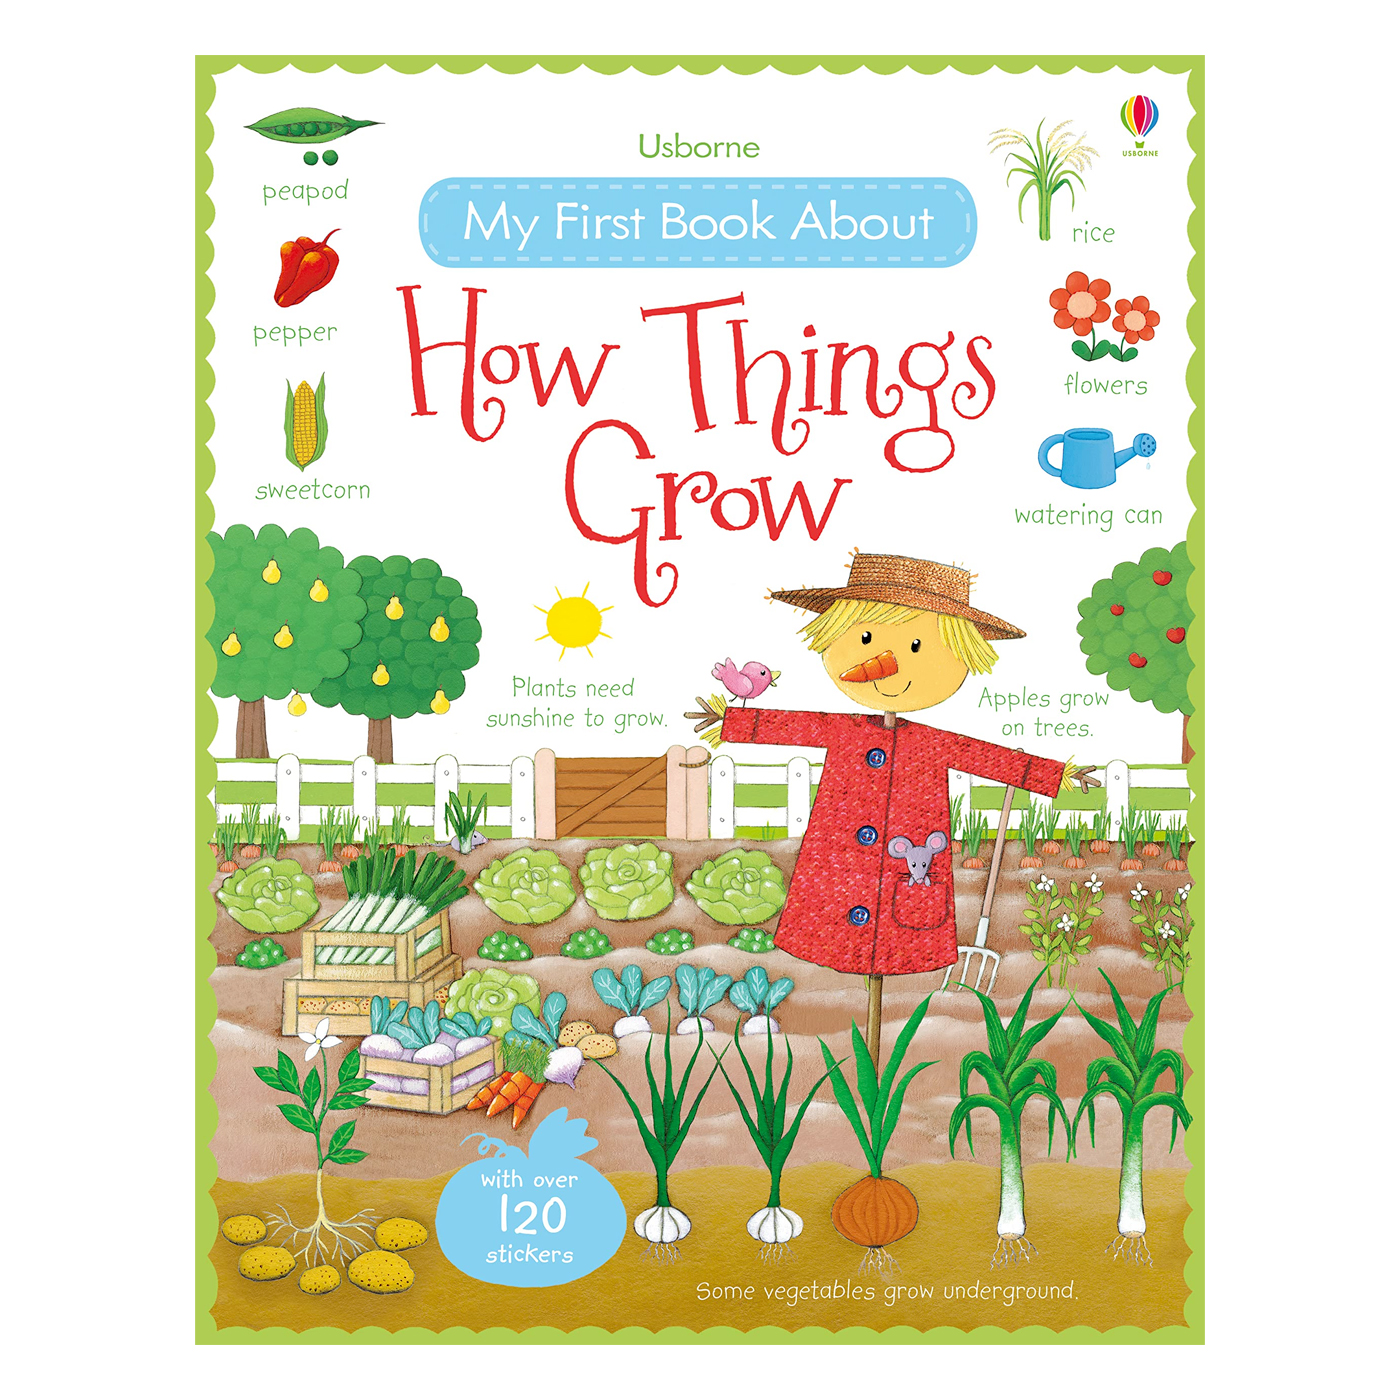  My First Book About How Things Grow